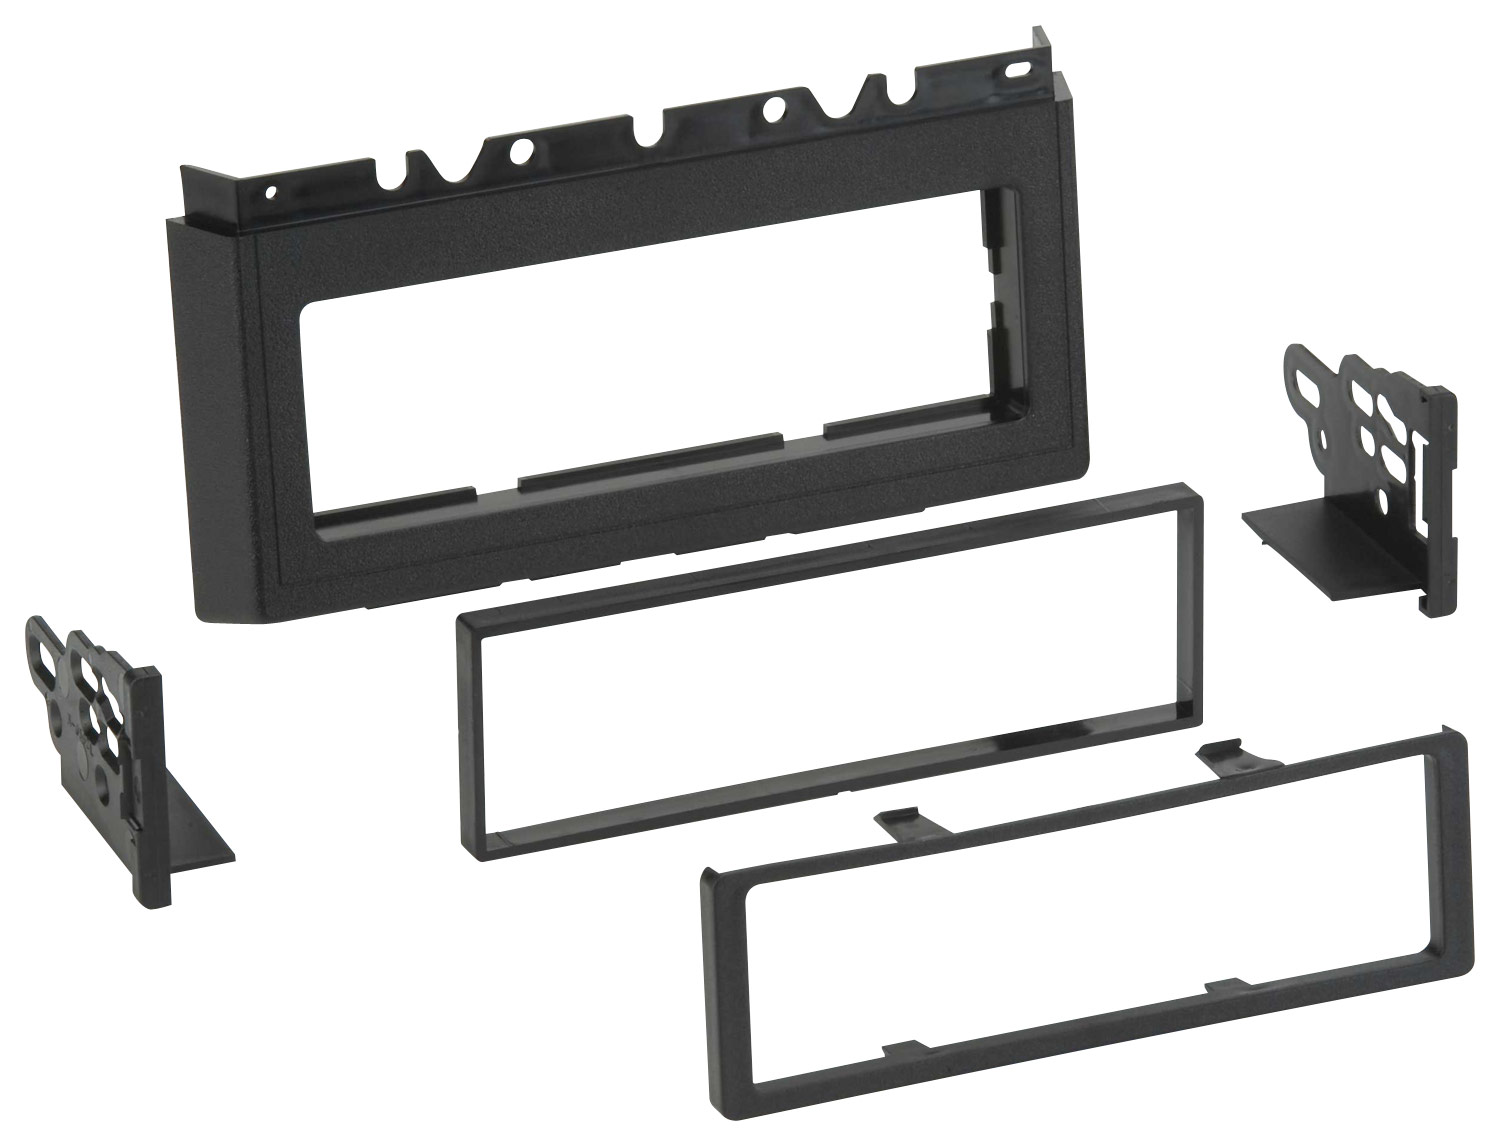 Metra - Dash Kit for Select 1988-1990 Chevrolet Caprice/Impala - Black was $16.99 now $12.74 (25.0% off)